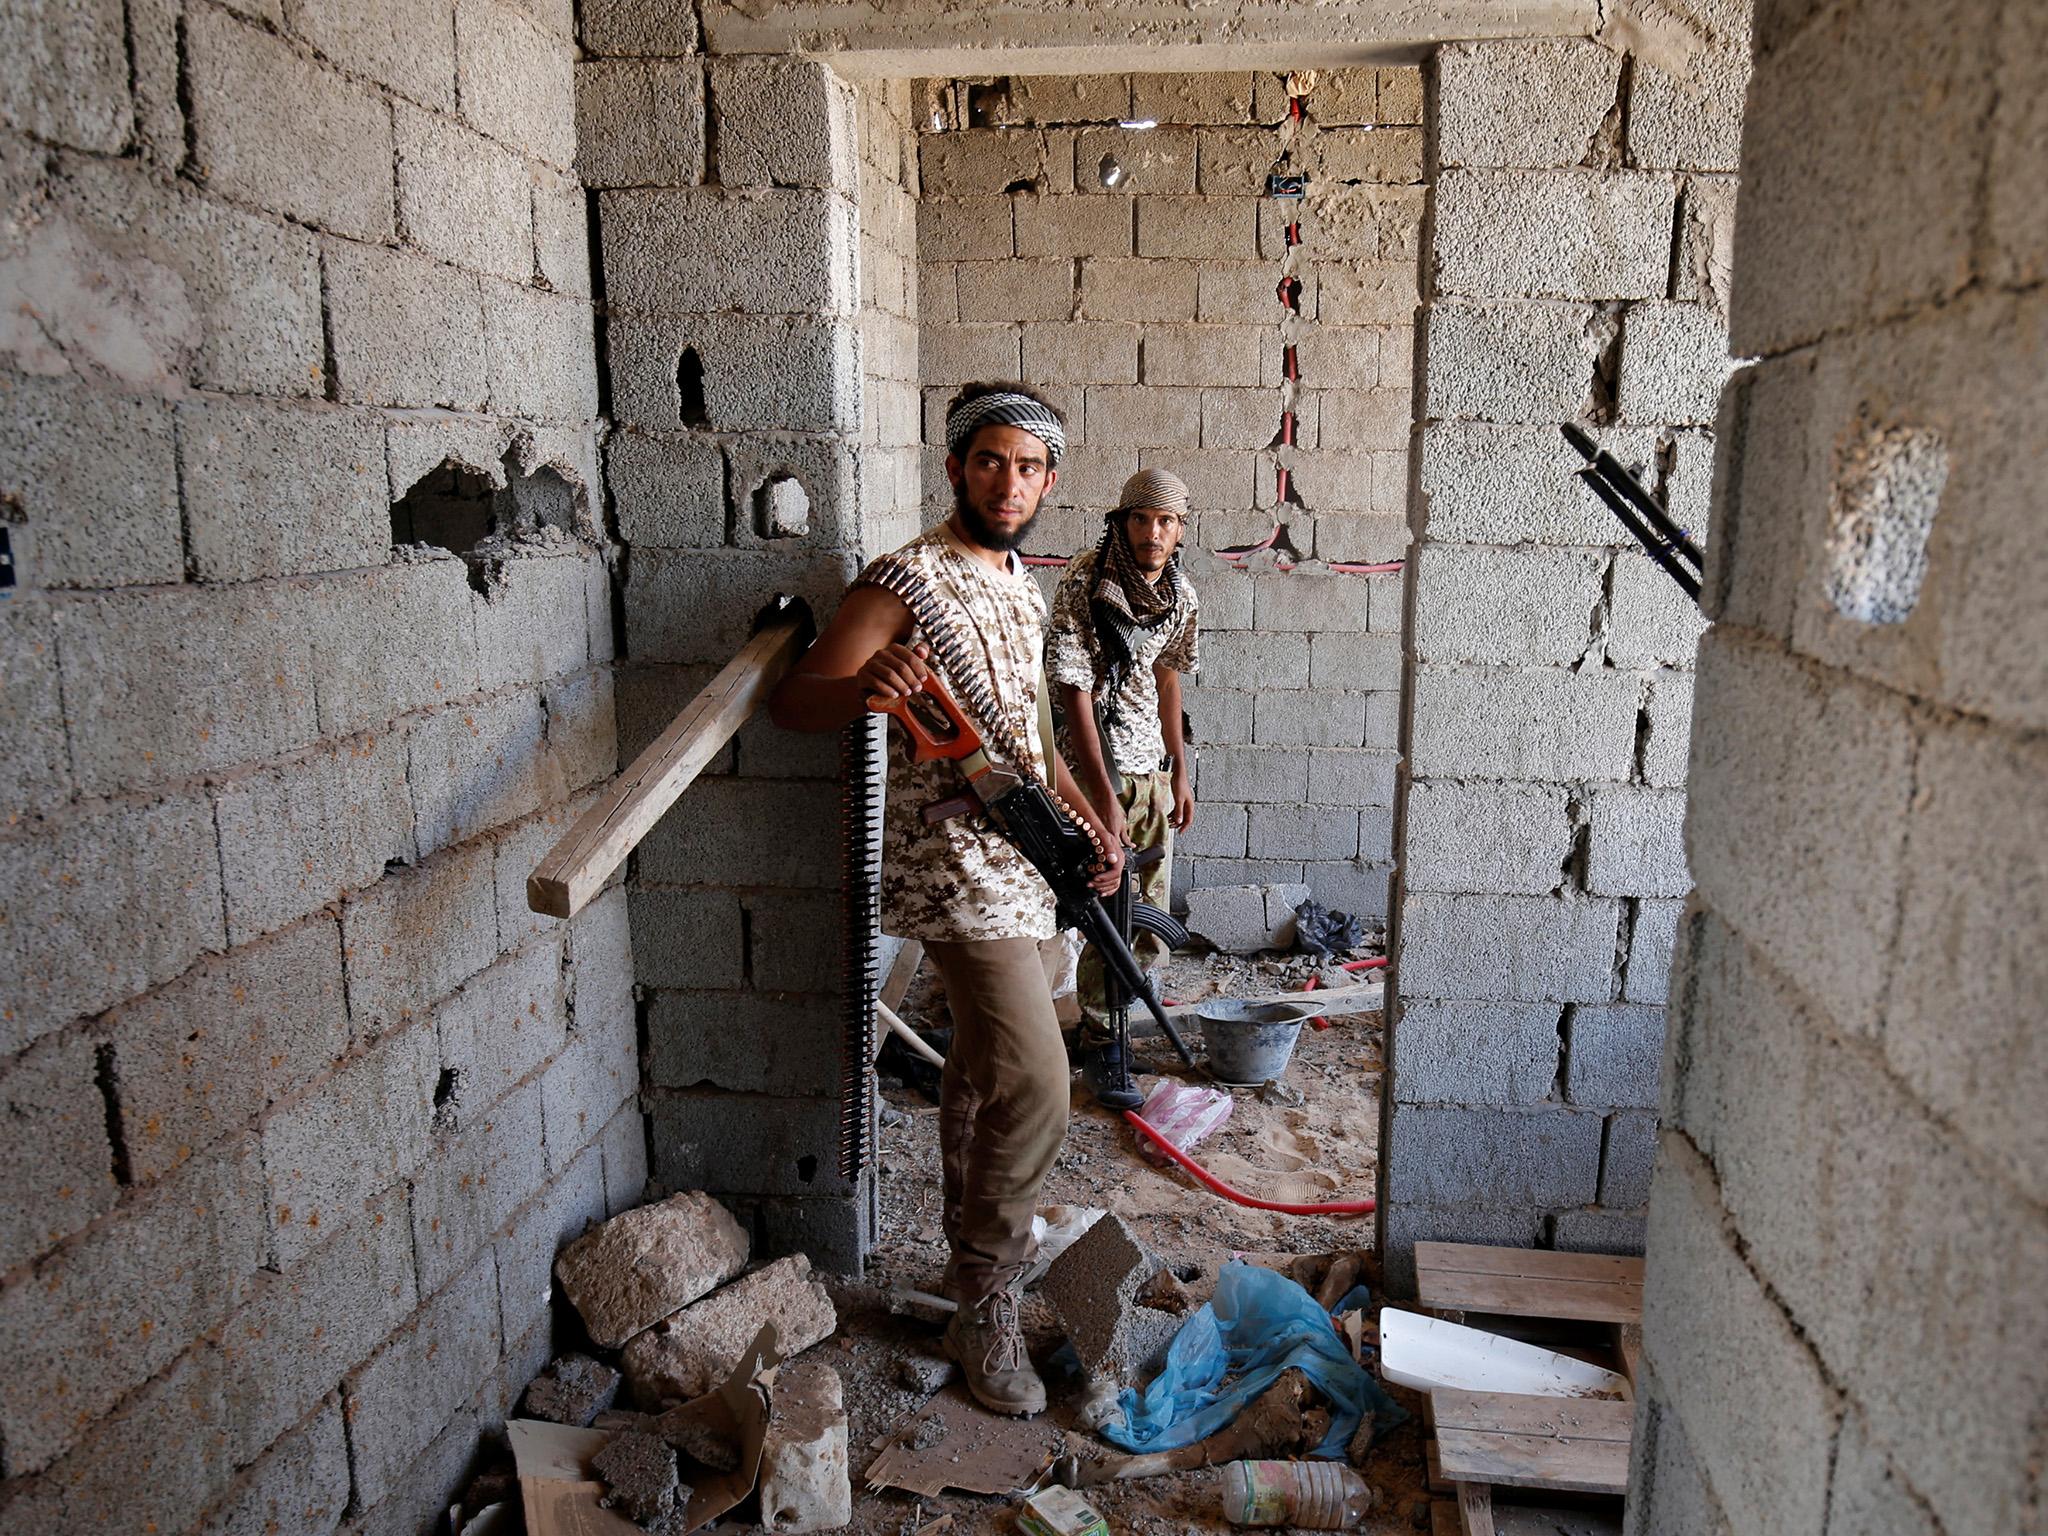 &#13;
Fighters take cover in a house during a battle with Isis fighters &#13;